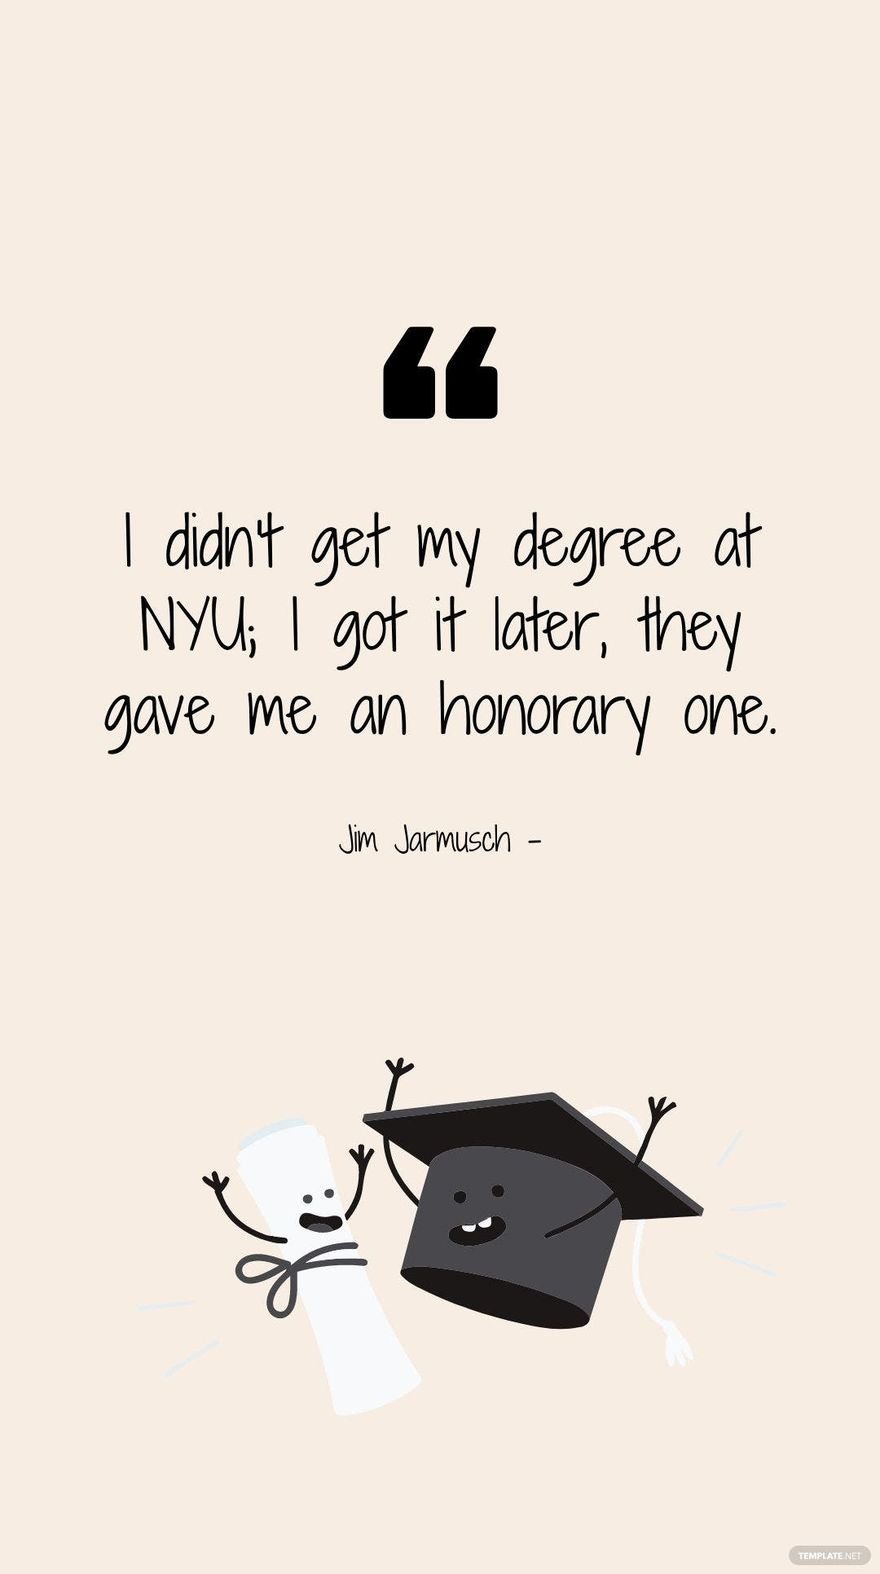 Free Jim Jarmusch - I didn't get my degree at NYU; I got it later, they gave me an honourary one. in JPG